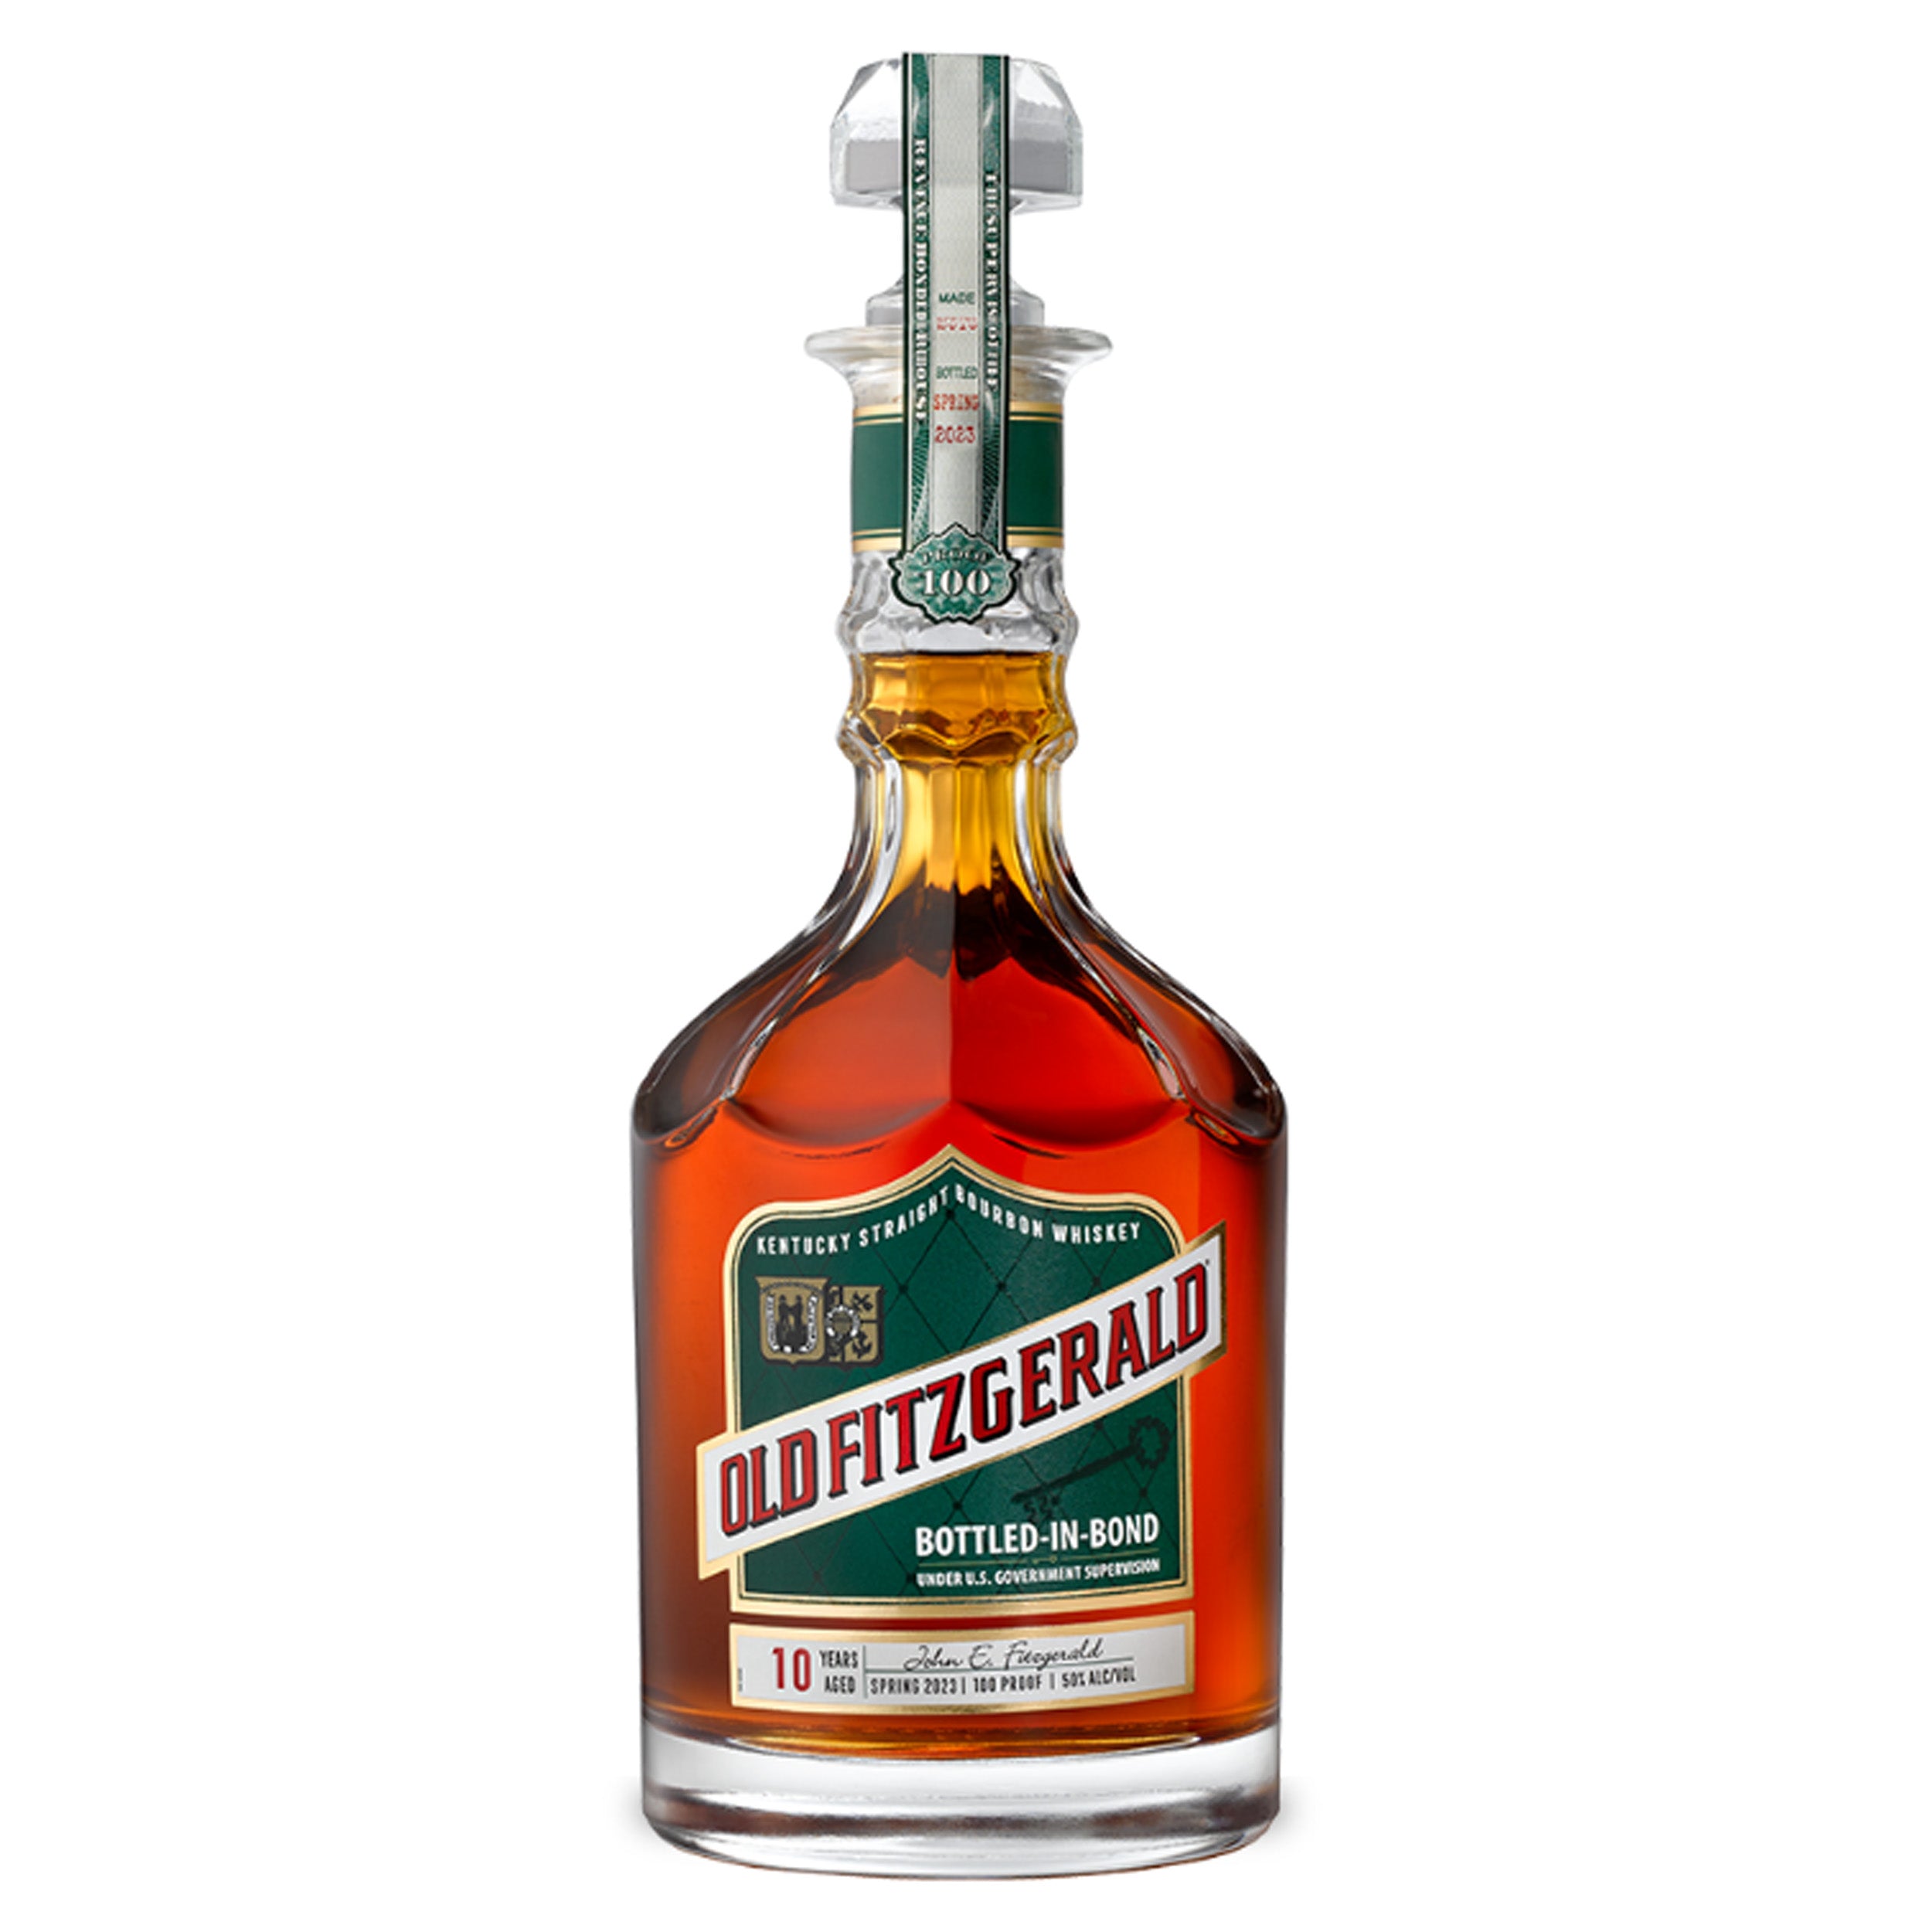 Old Fitzgerald Botted-In-Bond 10 Year Bourbon Whiskey